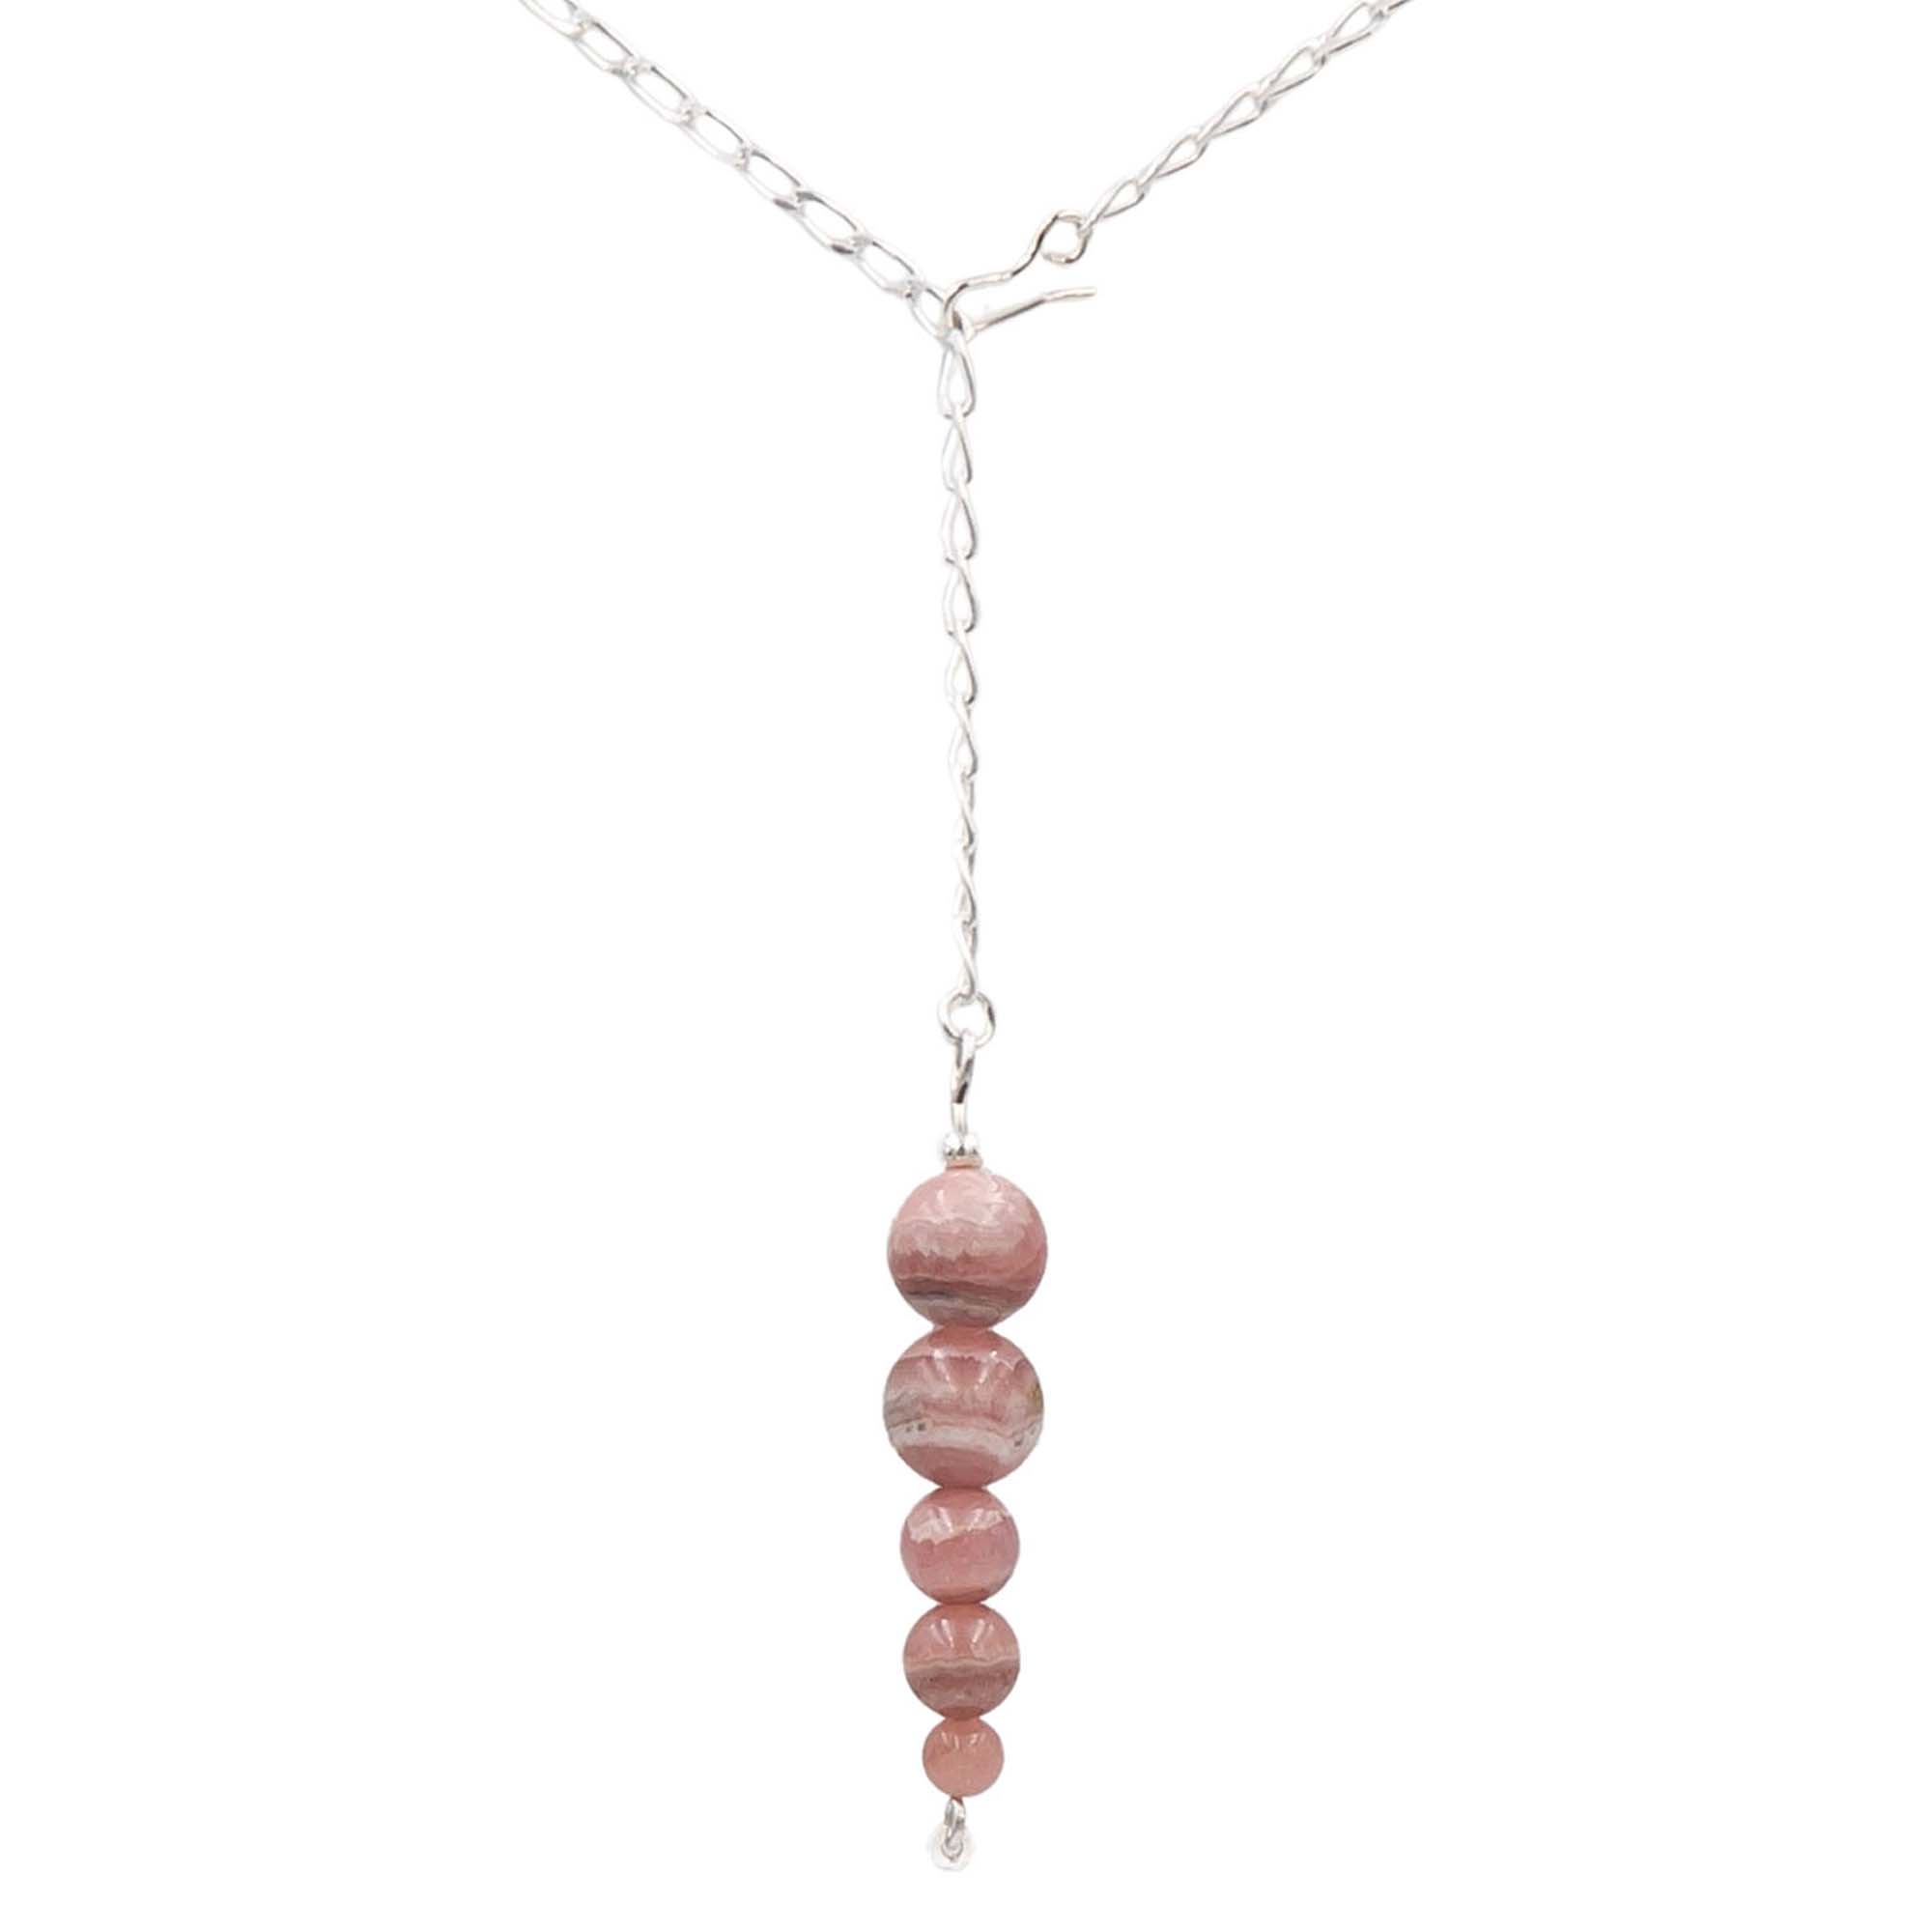 Earth Song Jewelry Handmade Rhodochrosite Pendant Sterling Silver Lariat Necklace - Eco-Friendly Jewelry handmade in Colorado, USA